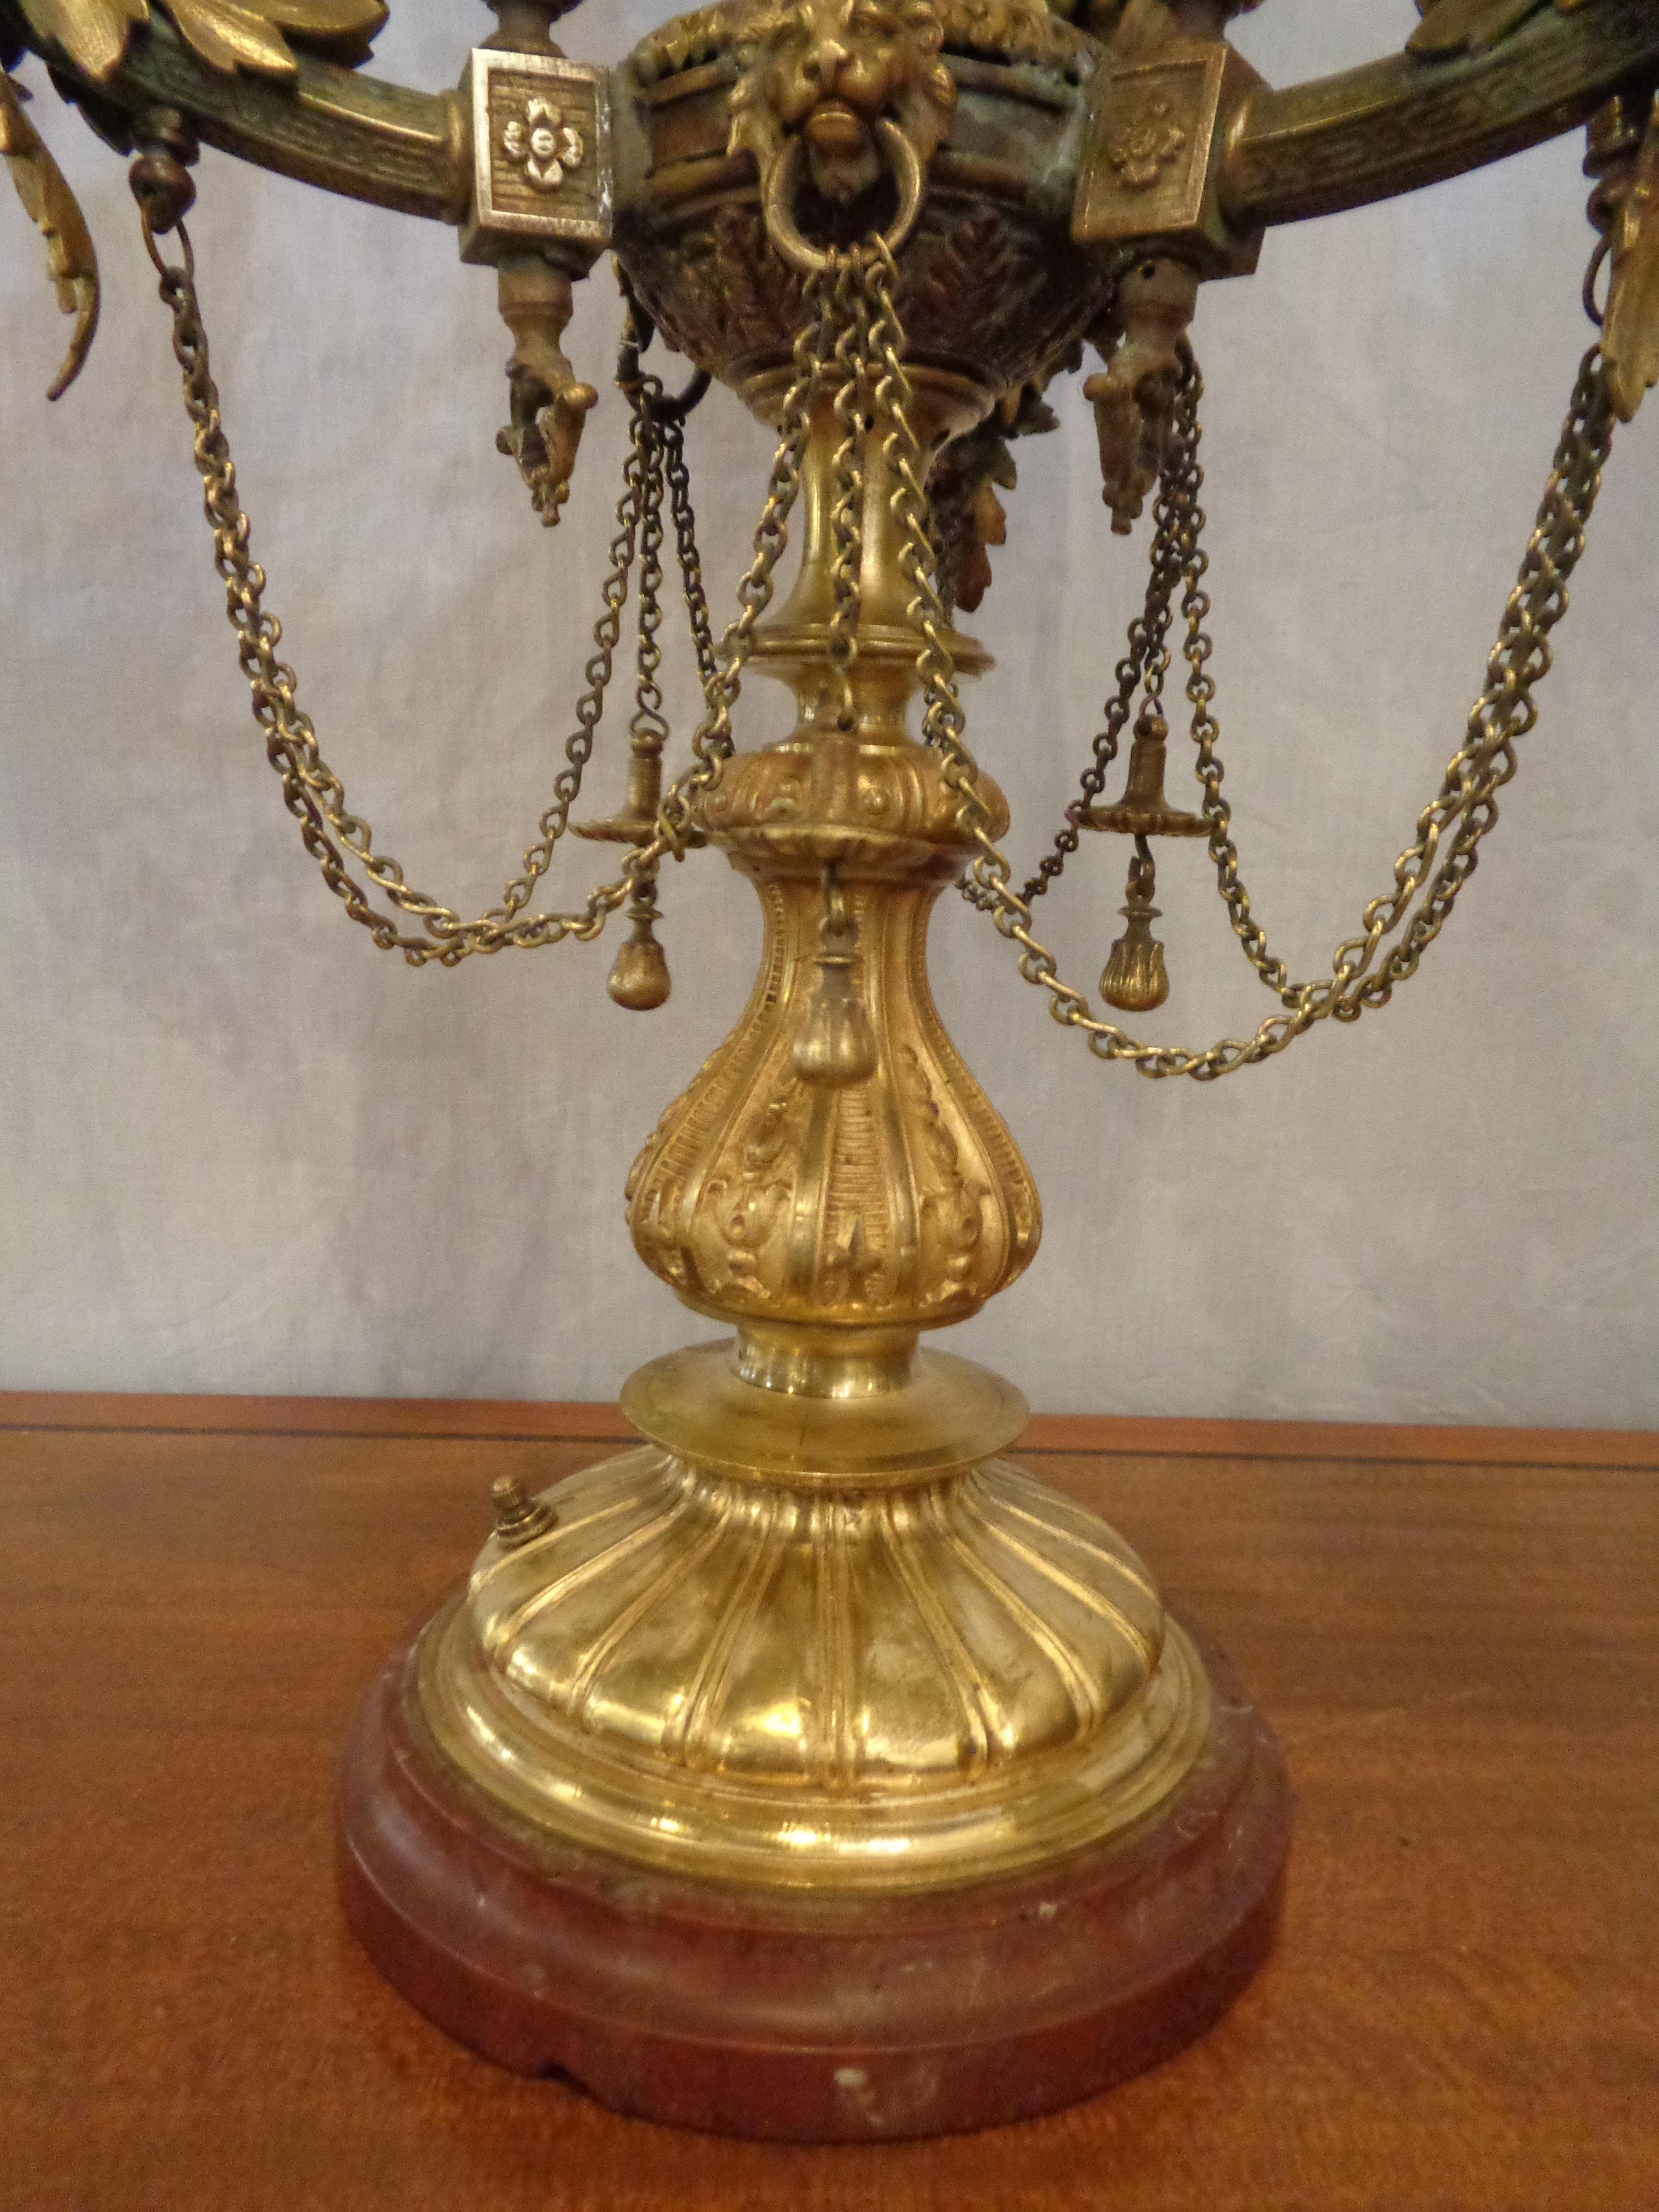 A large doré bronze full bodied serpent candelabra lamp. The rouge marble base supporting a group of three full bodied dragons in flight seemingly chained to a central post decorated by a centre pole and lion heads. The whole terminating in three